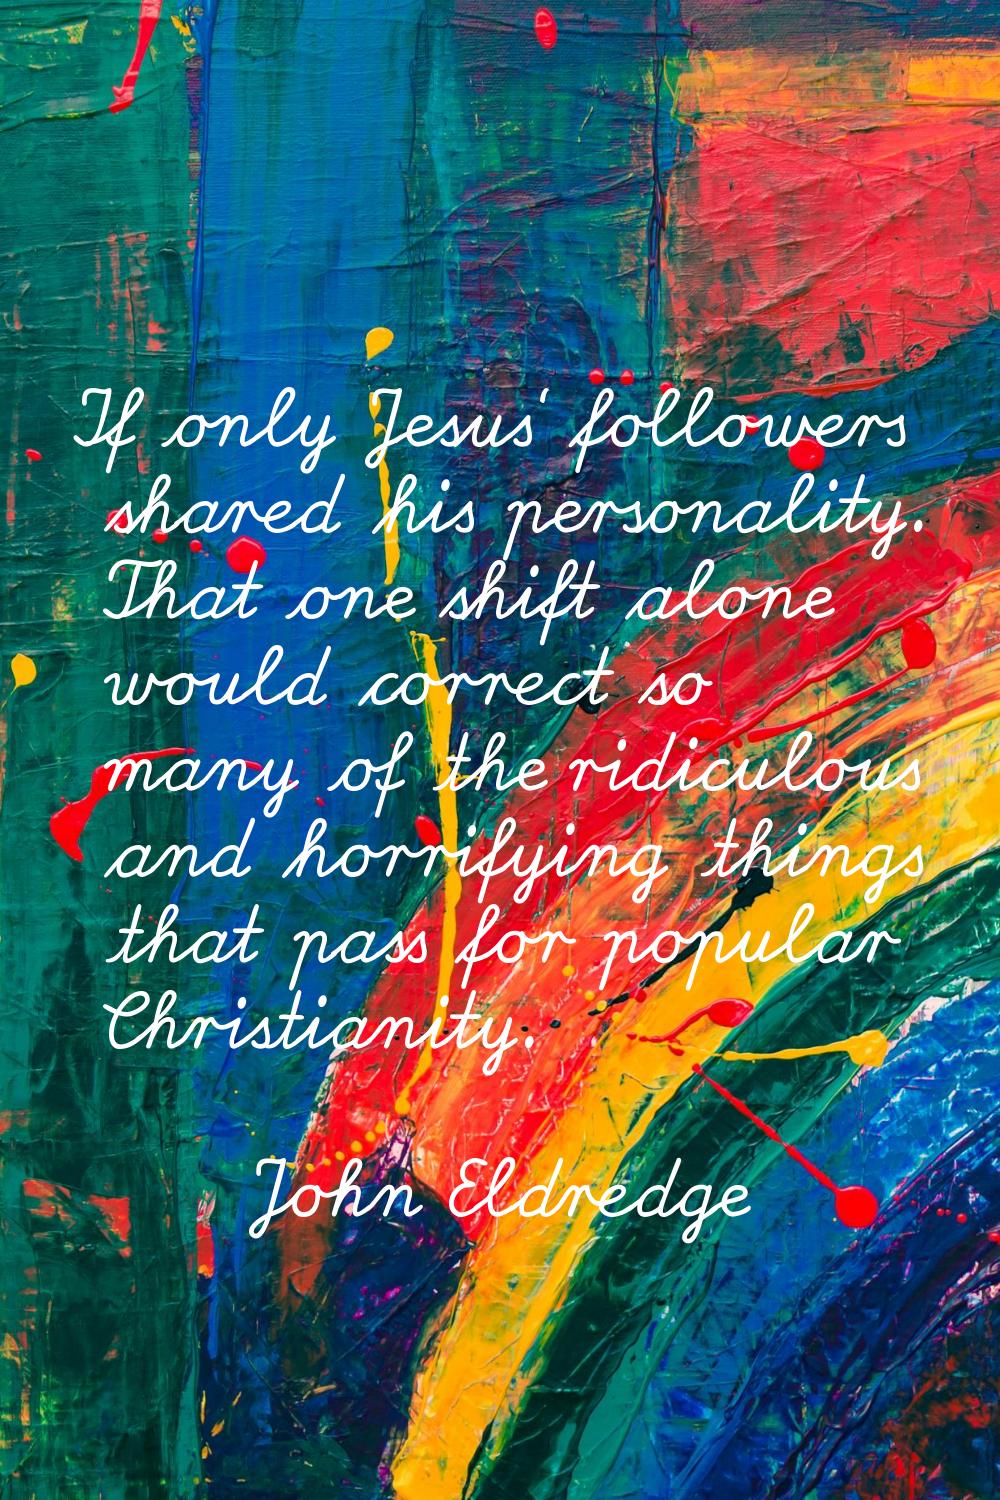 If only Jesus' followers shared his personality. That one shift alone would correct so many of the 